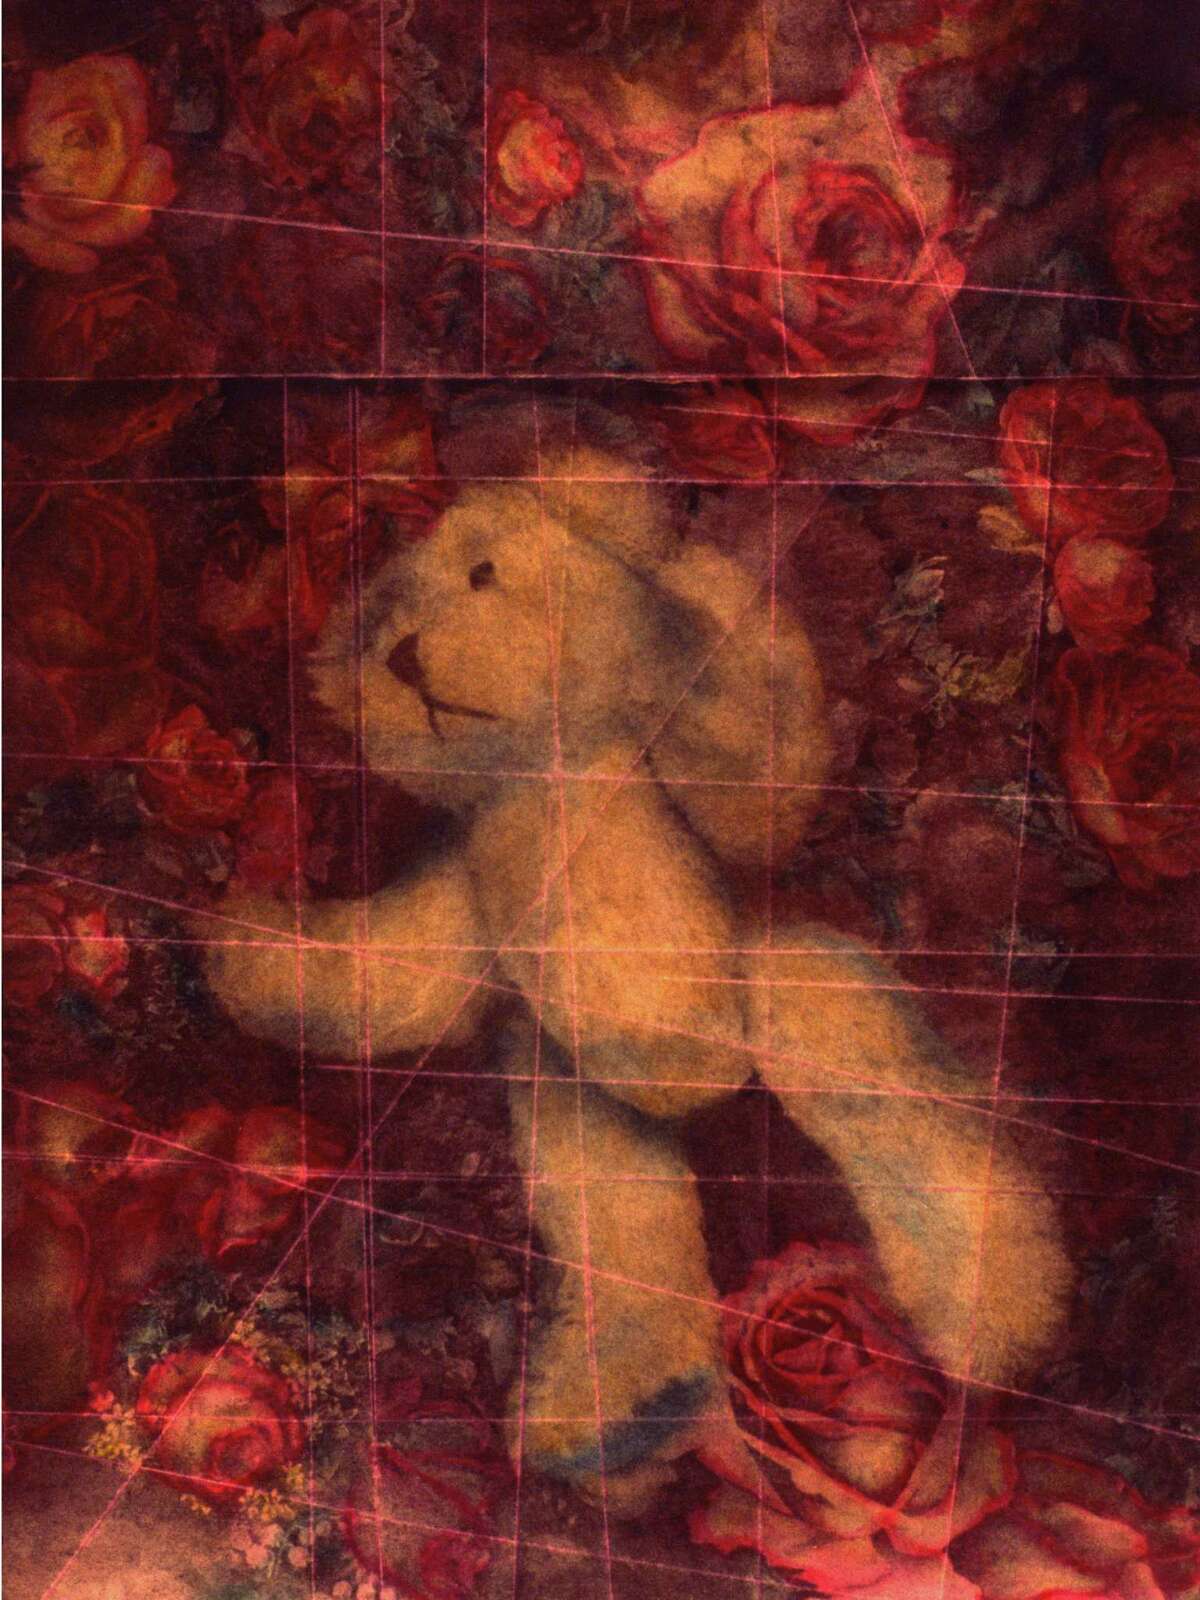 A photo collage from the “Innocent Age” series by Kathy Vargas. The roses are symbolic of children who are cherished and nurtured by their parents.